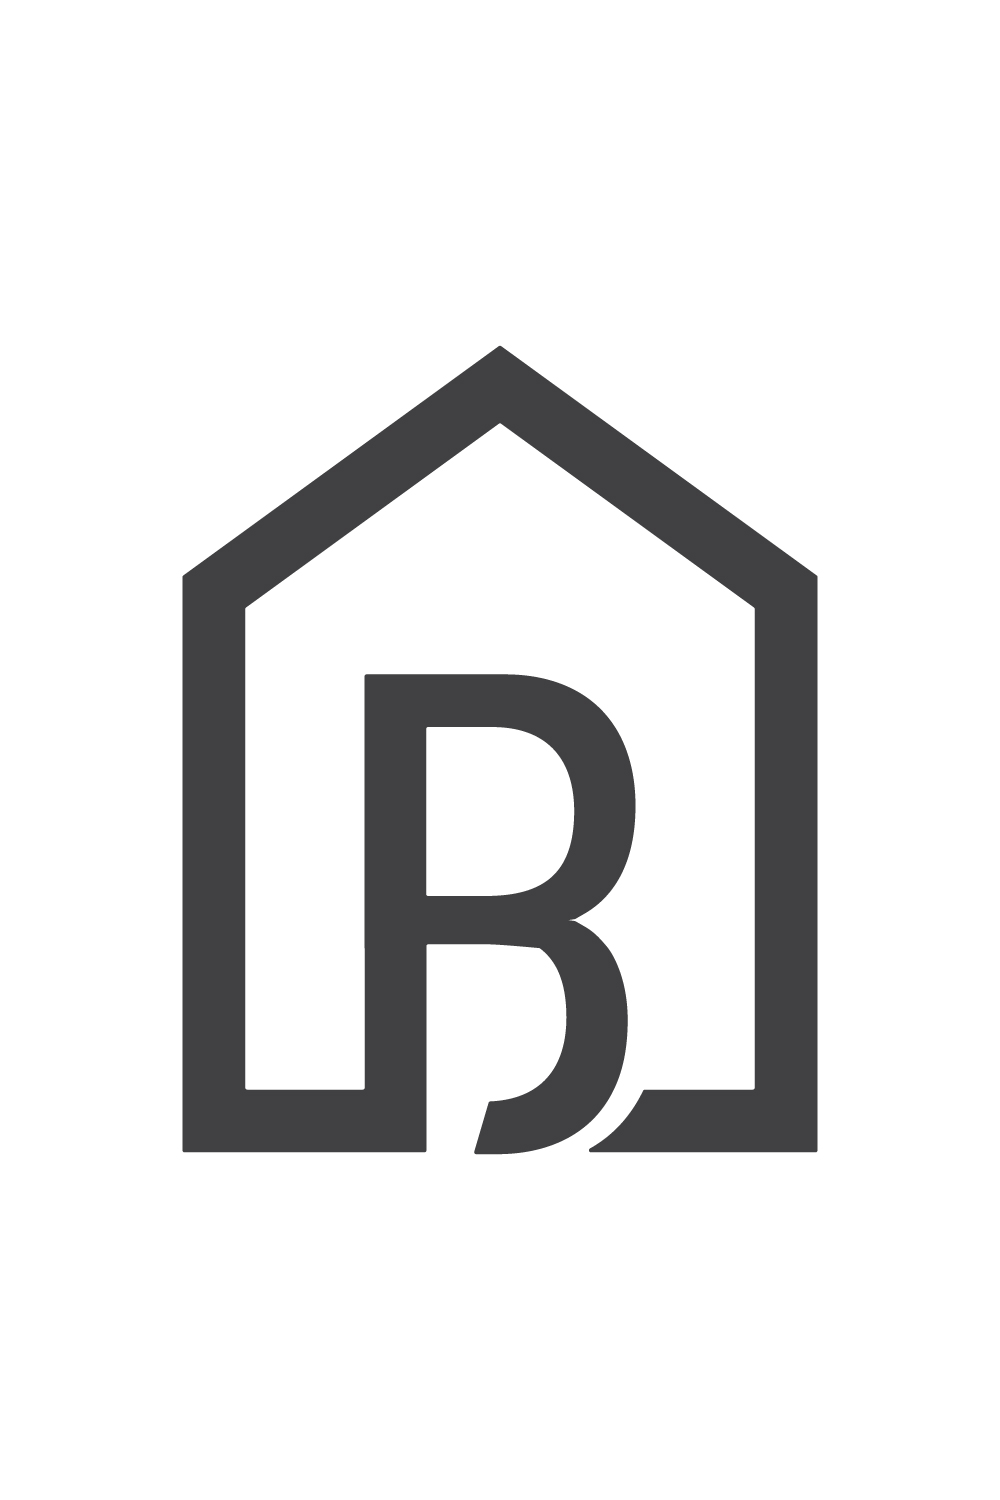 Luxury B Stay house logo design B letters logo design vector icon design B Real Estate logo design best business icon pinterest preview image.